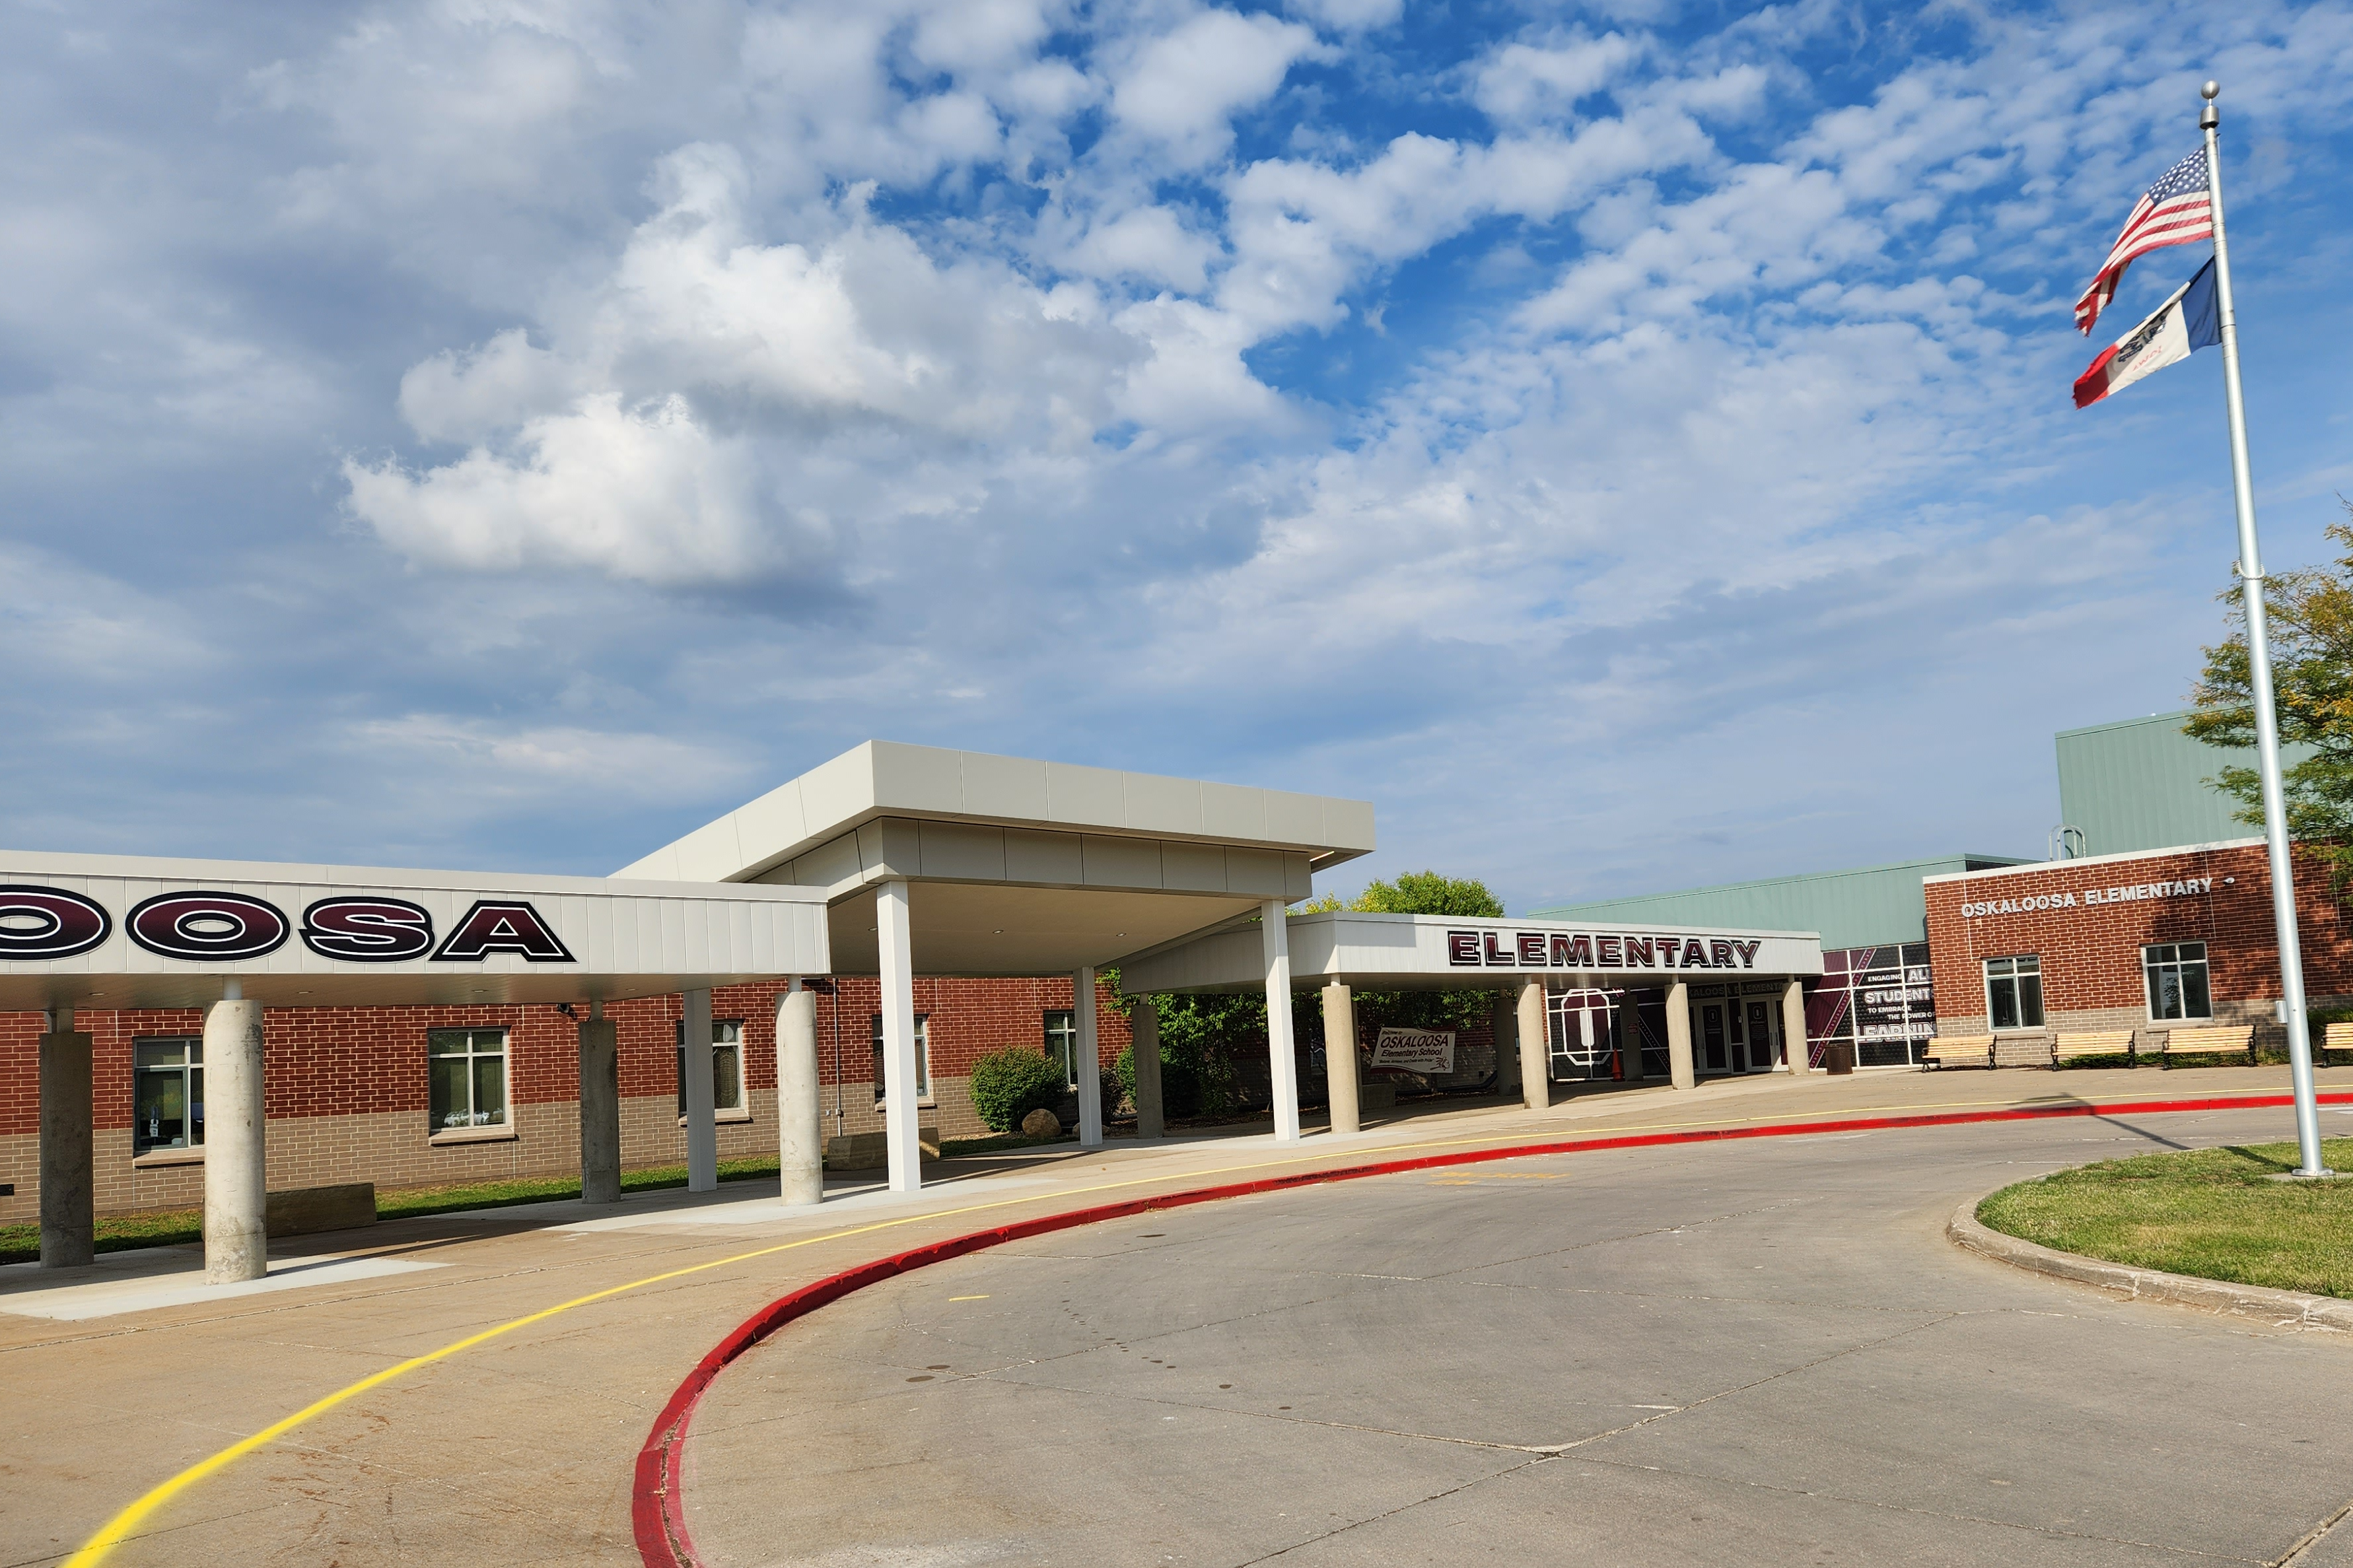 Elementary main entrance on west side